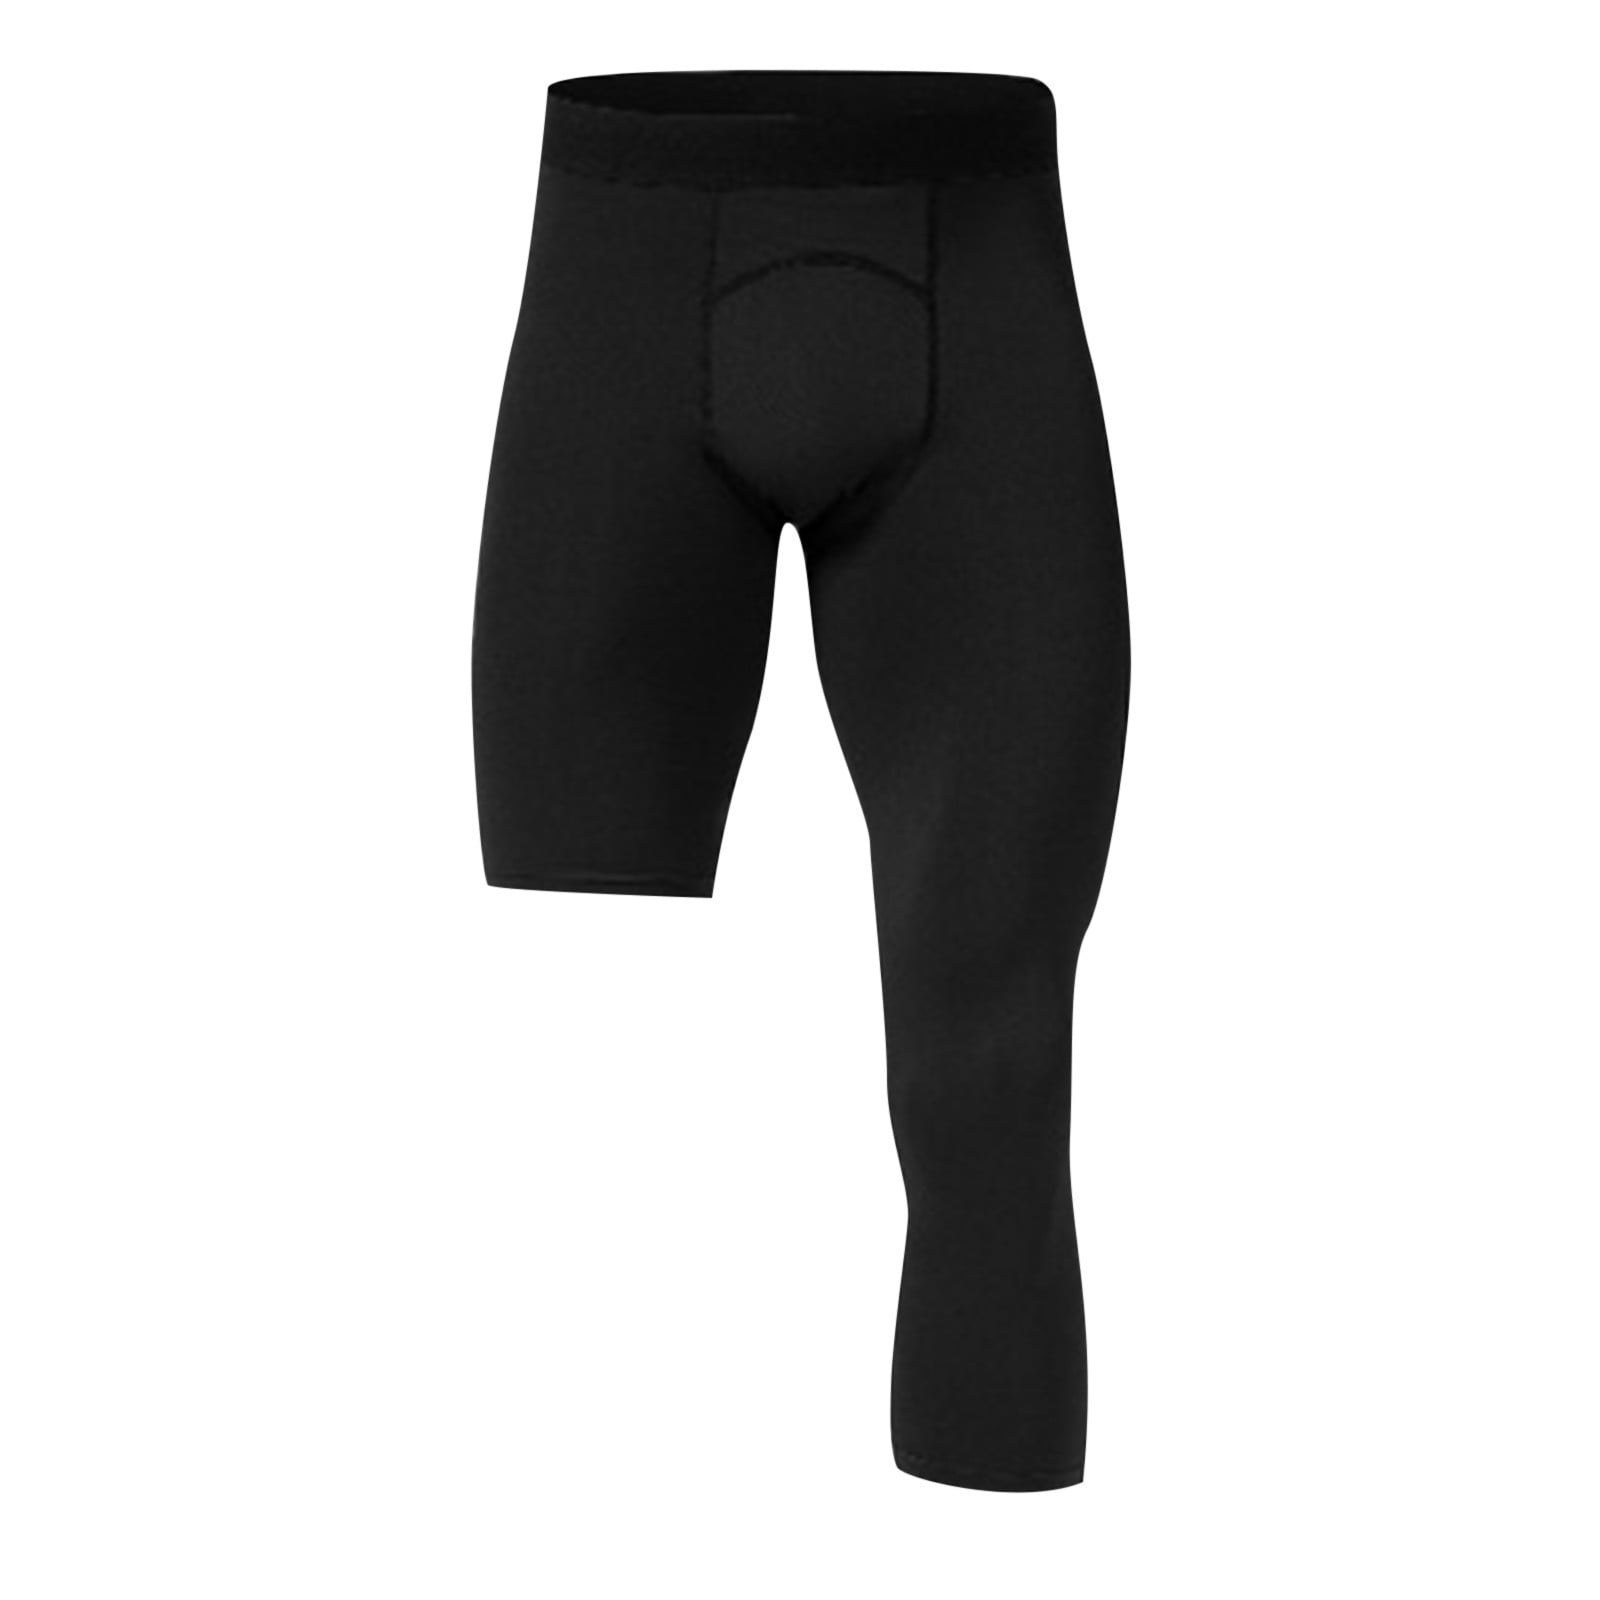 TANGNADE Mens Simple Exercise Tight Fitness Running Stretch Basketball ...